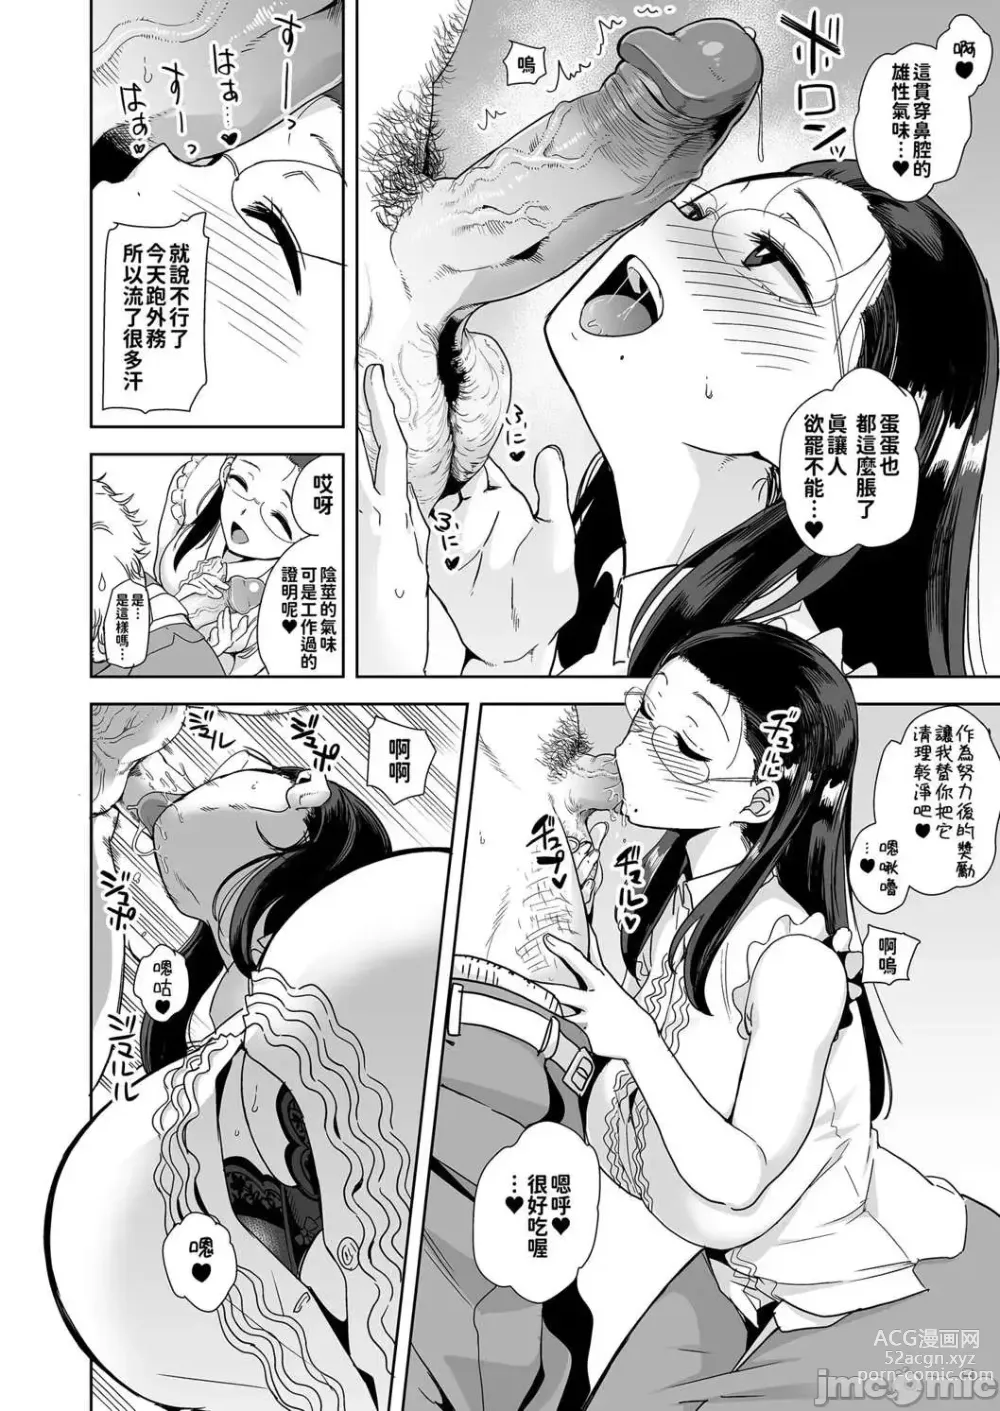 Page 7 of doujinshi Seika Girls Academys Officially Approved Prostitute Man 1 + 2 + 3